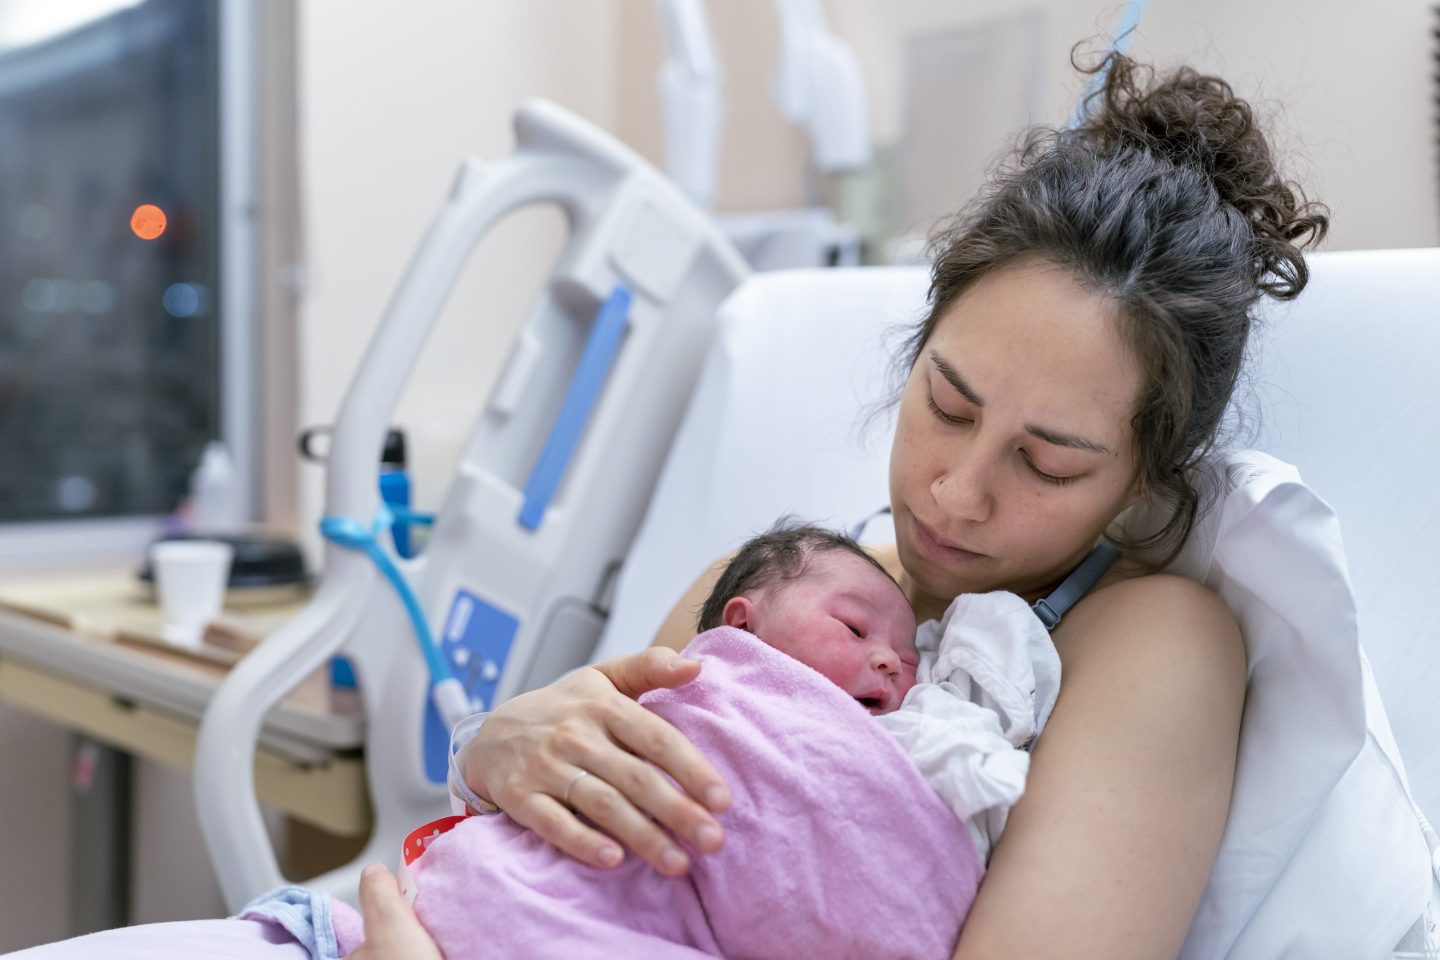 Birthing mothers’ near-death experience rates are 100 times higher than maternal mortality—and we don’t even know exactly why